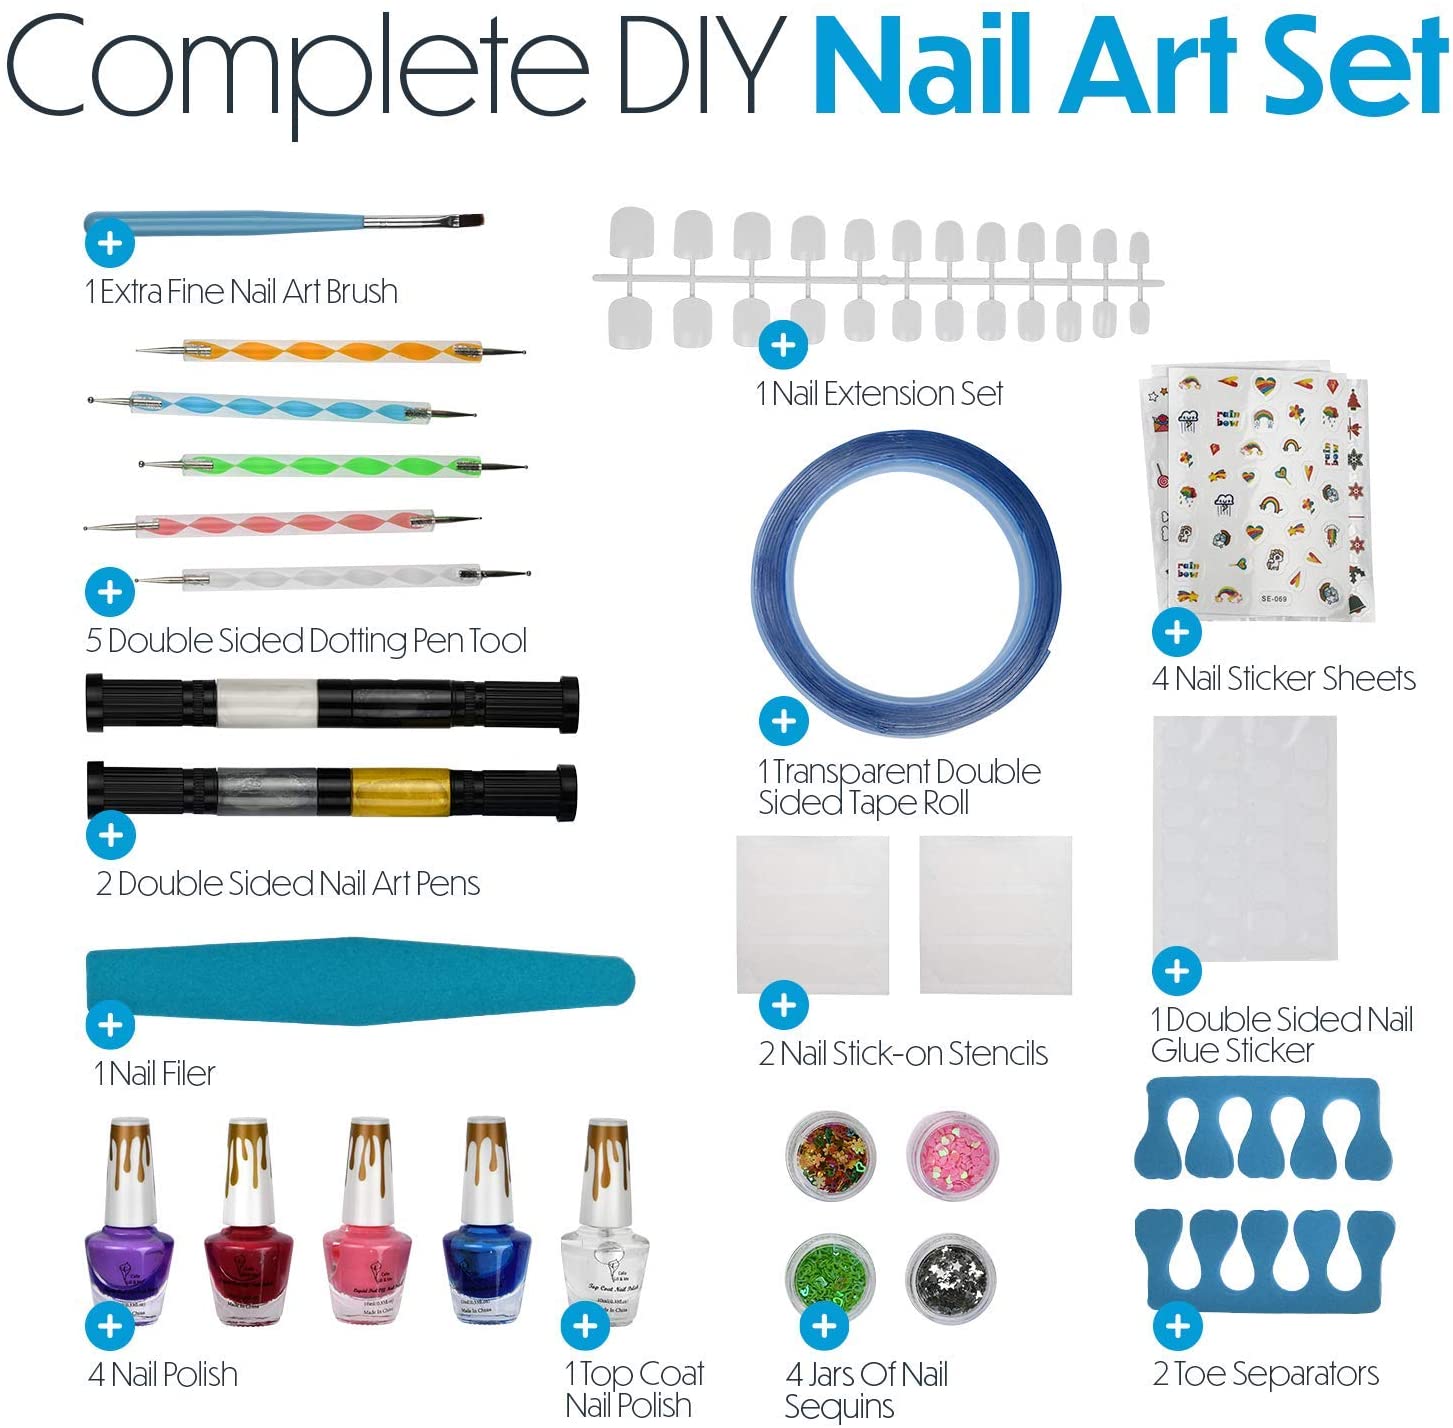 Buy Nail Kit for Girls Ages 7-12, FunKidz Peelable Nail Art Set with Nail  Polish Pens Glitter Sticky Temporary Nail Decoration Makeup Kit for Teens  Party Online at Low Prices in India -